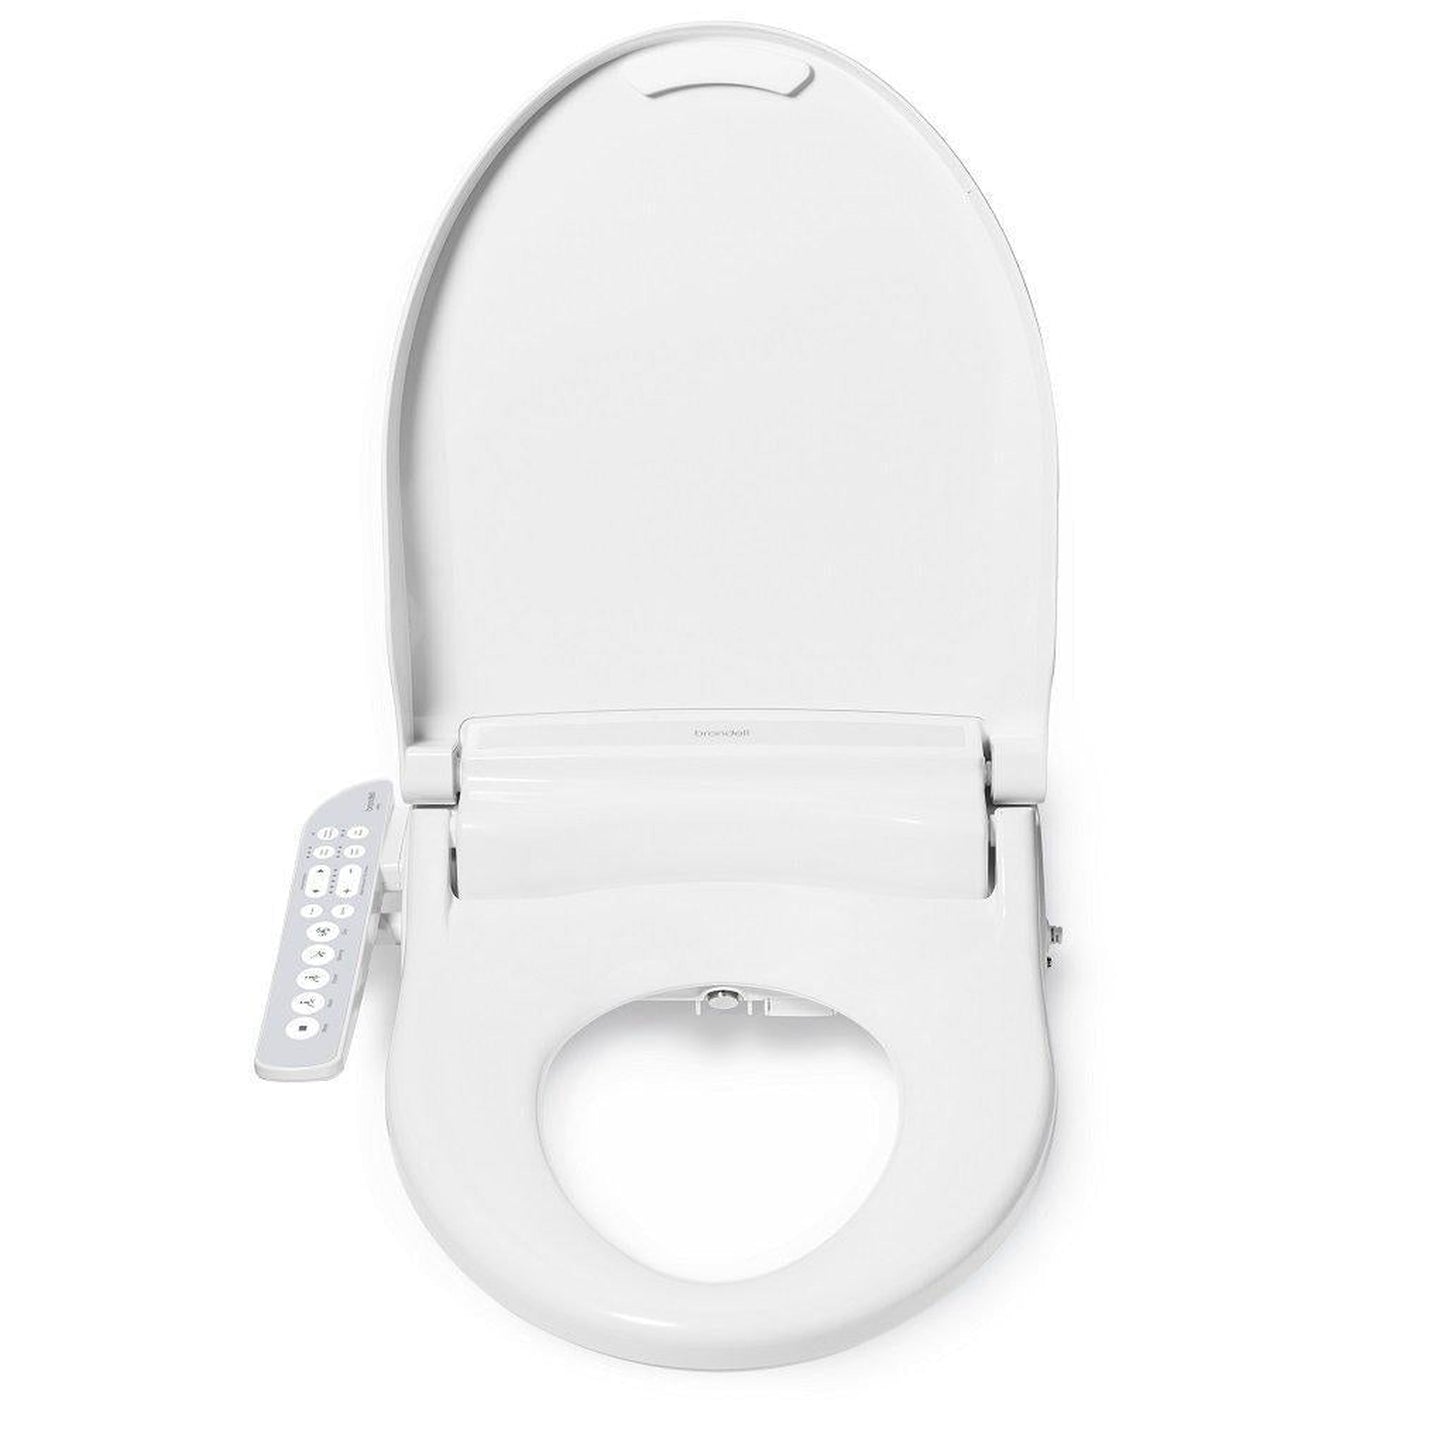 Brondell Swash Select DR801 19.5" White Round Electric Advanced Bidet Toilet Seat With Side Control Panel